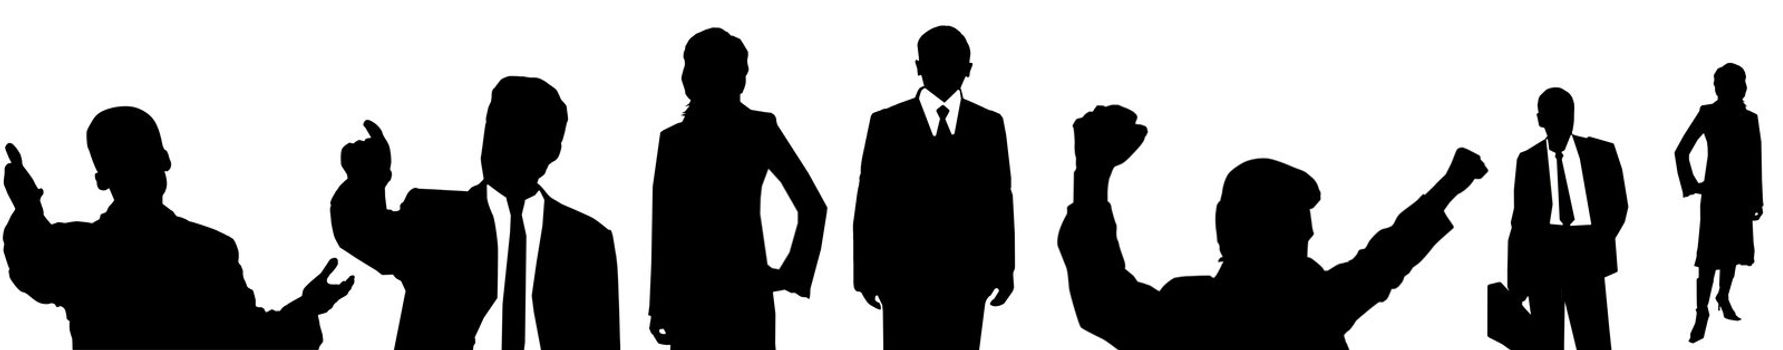 An image of silhouettes of managers